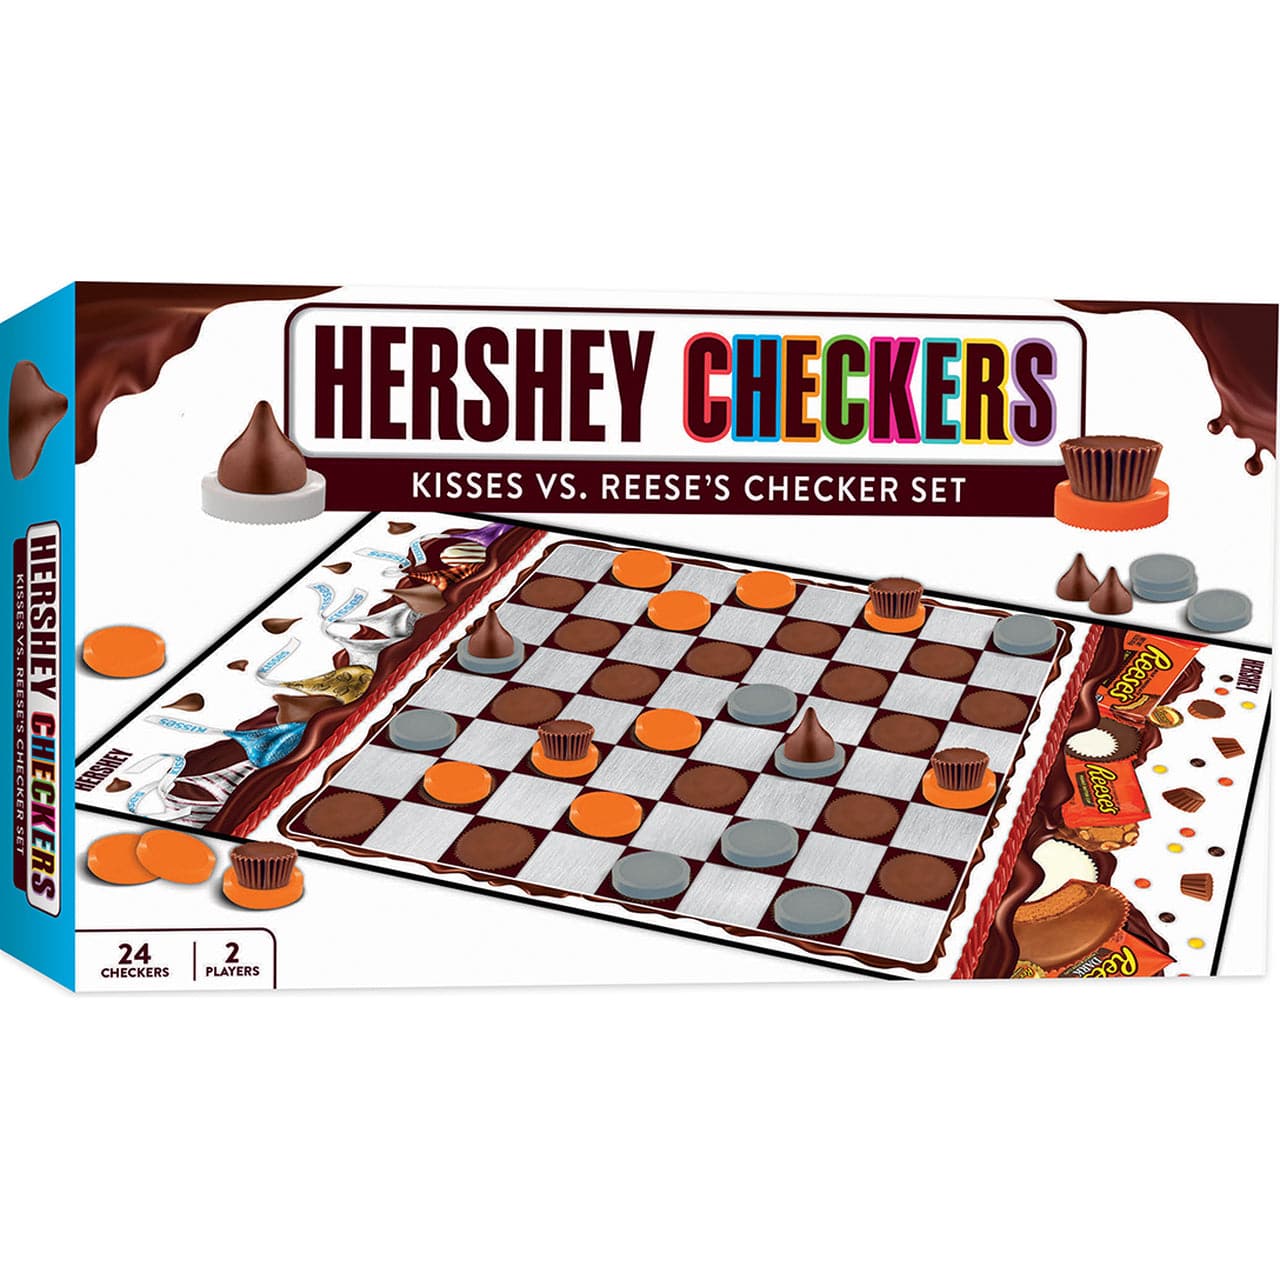 MasterPieces-Hershey Checkers Board Game-41984-Legacy Toys